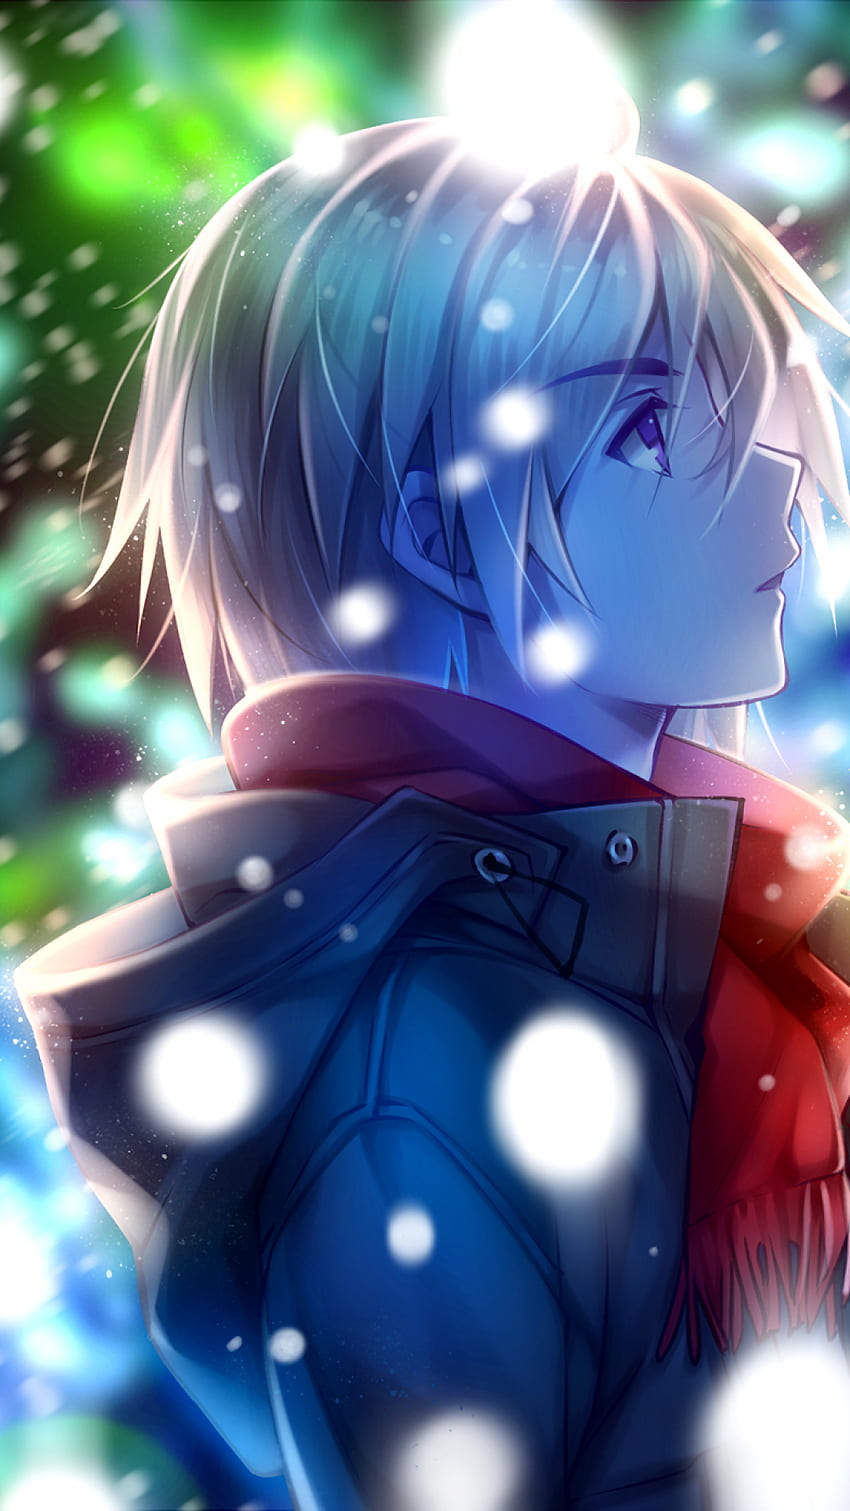 Anime boy wallpaper: Wallpaper for boys anime APK for Android Download